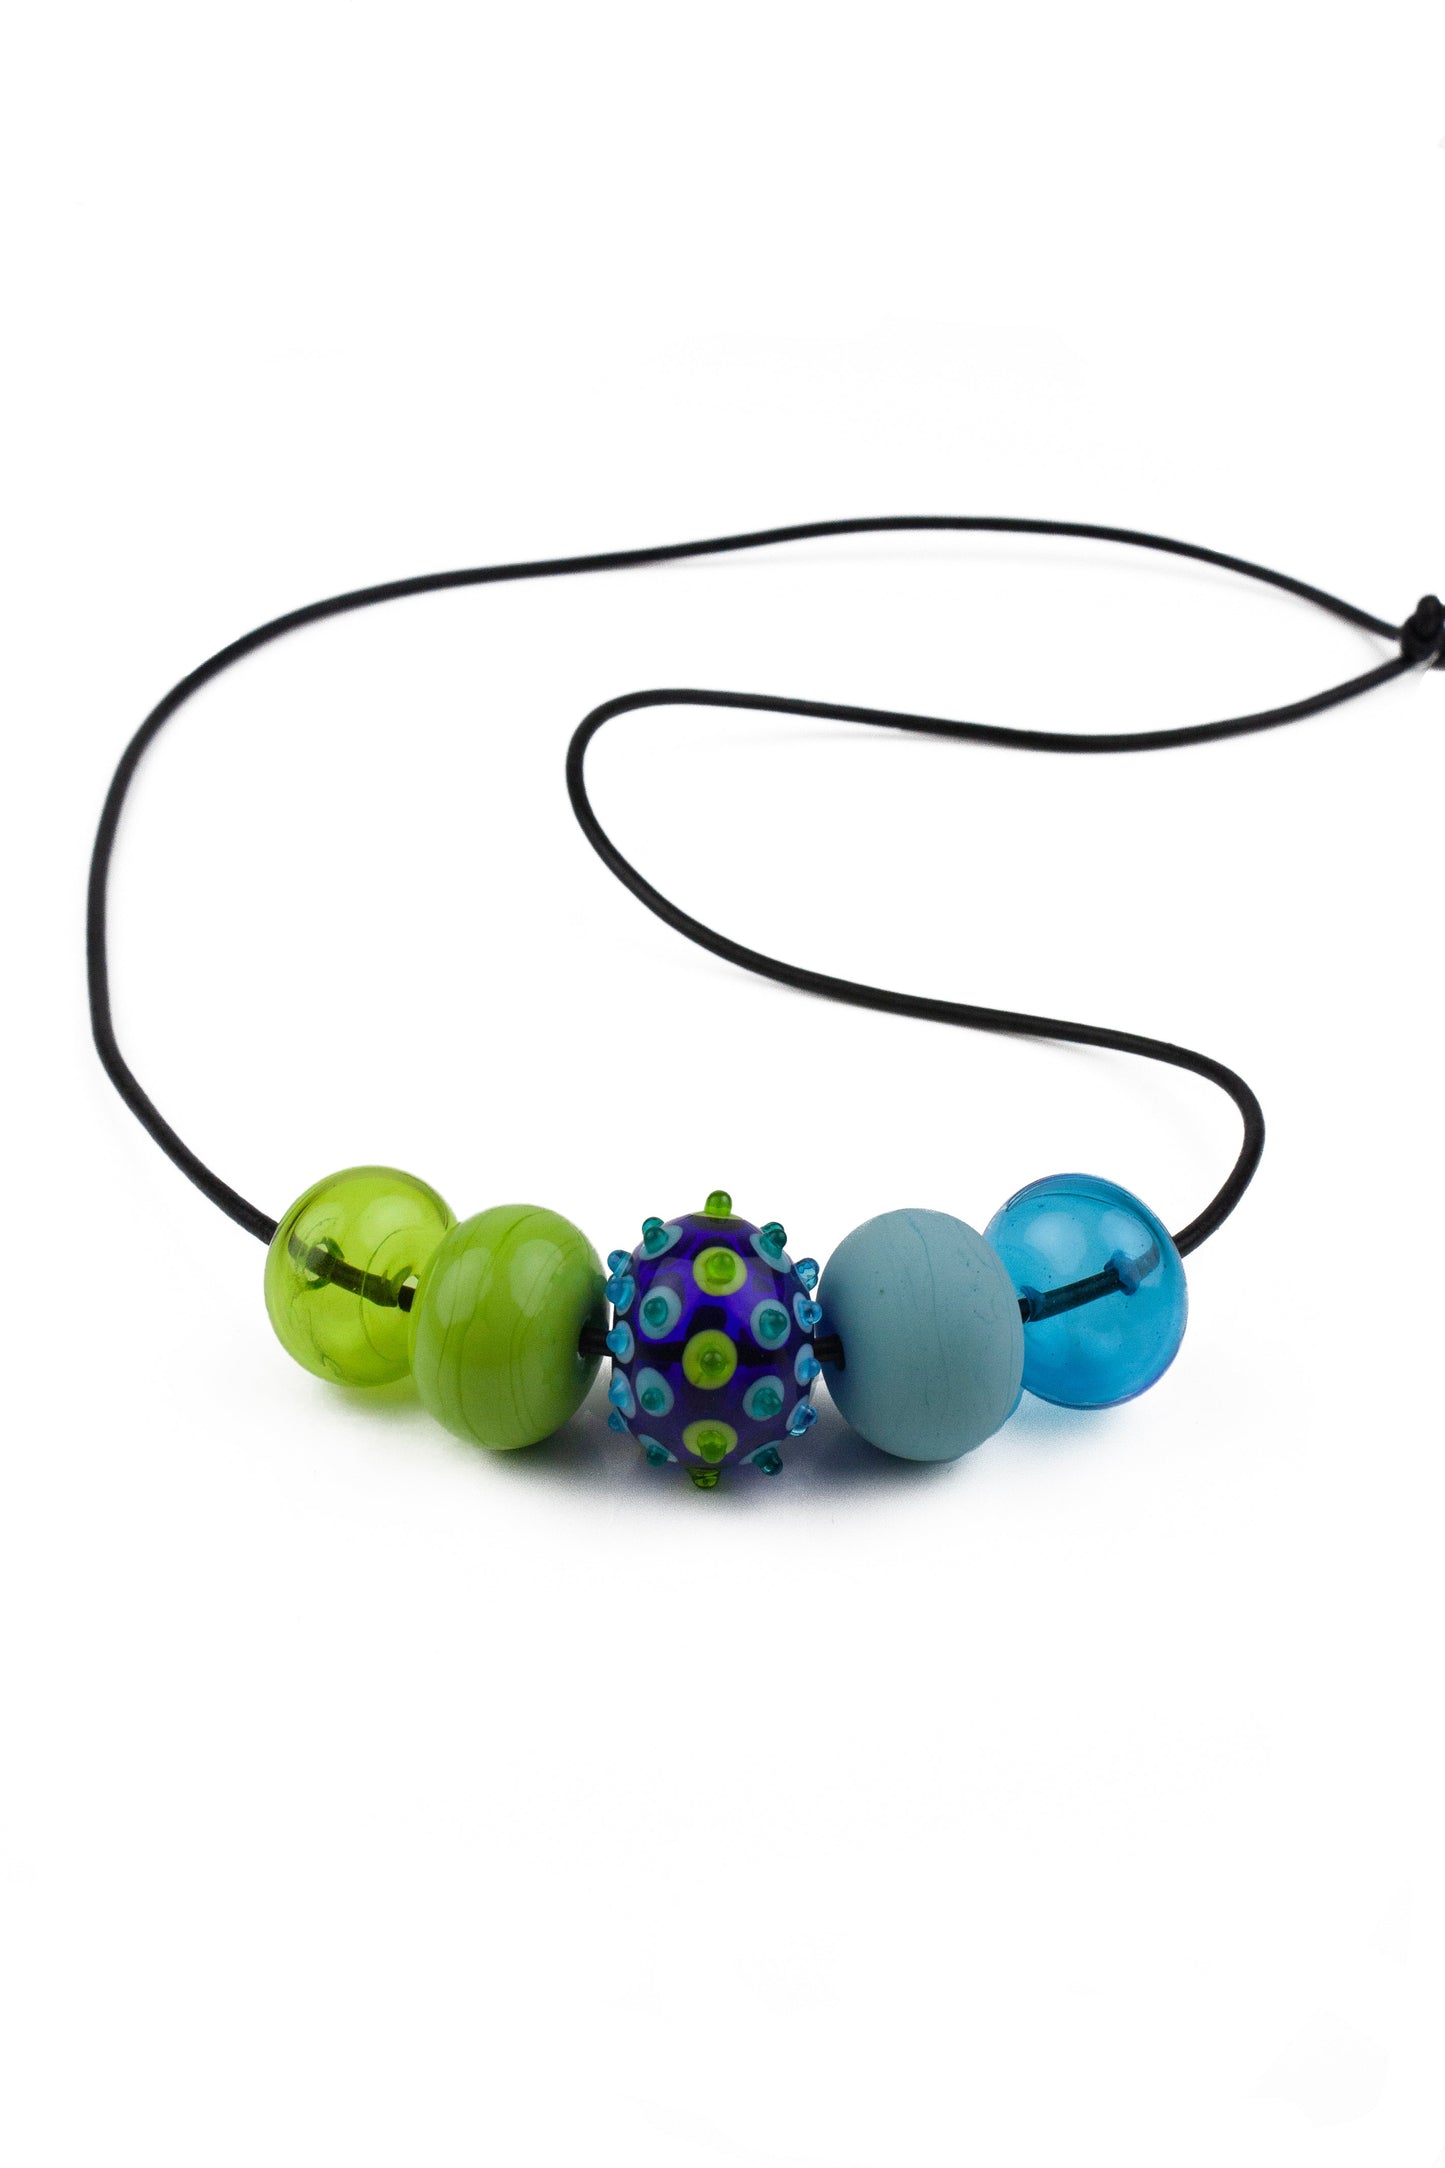 5 bubble bead necklace - blue and green with focal bead